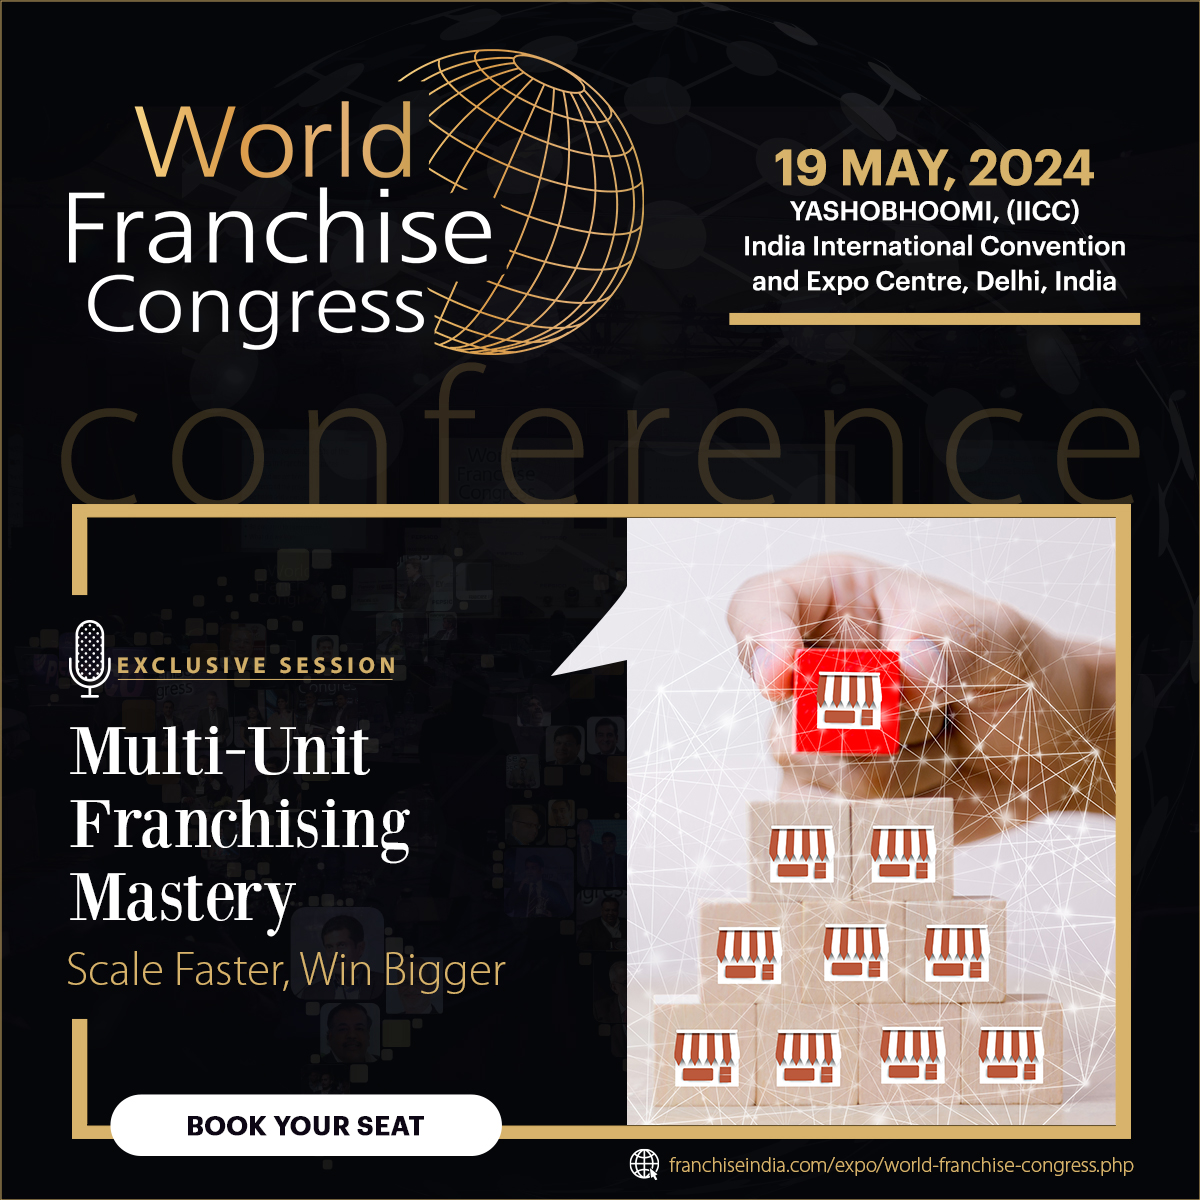 🗓️Join us at the #WorldFranchiseCongress on May 19, 2024, at #Yashobhoomi (IICC), India International Convention Centre, Delhi. Be part of a global gathering shaping the future of franchising.✨

Register now:- franchiseindia.com/expo/world-fra…
#IndustryLeaders #Networking #Franchiseindia